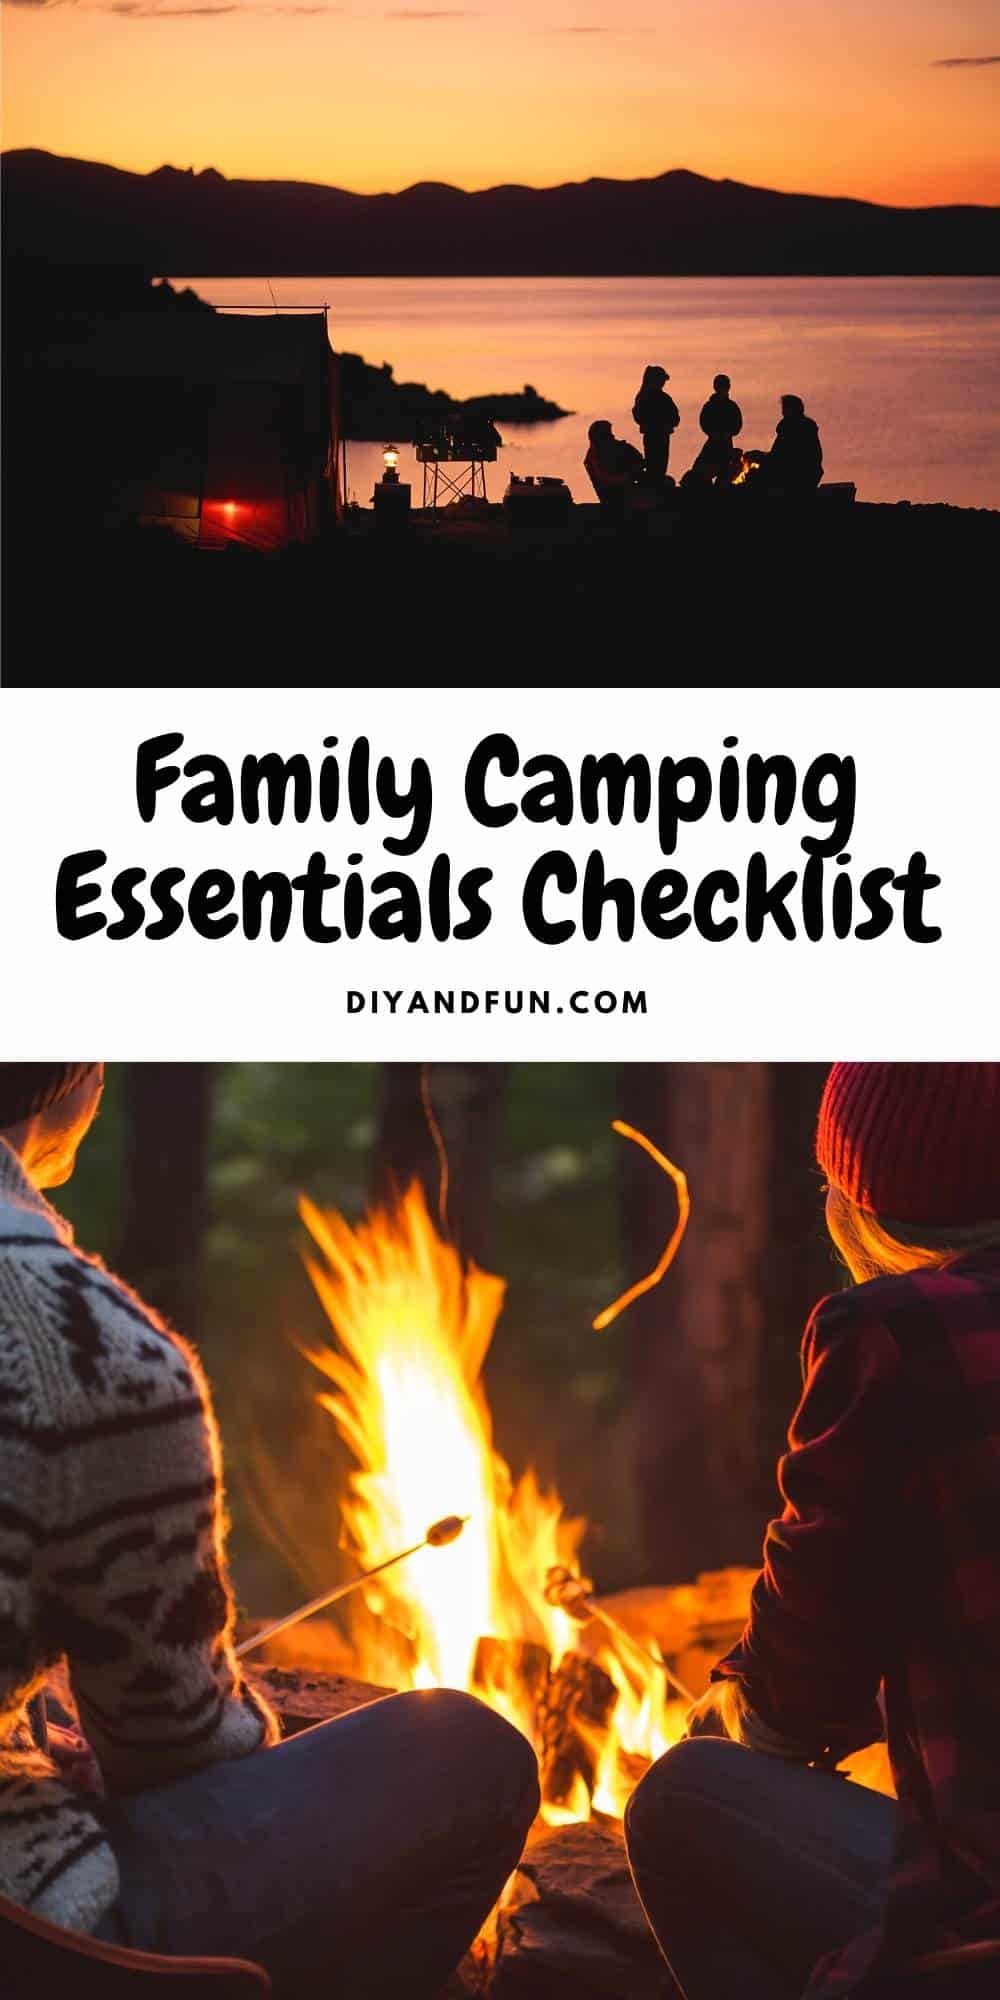 Family Camping Essentials Checklist, an essential listing of most everything that you should not forget when camping as a family.